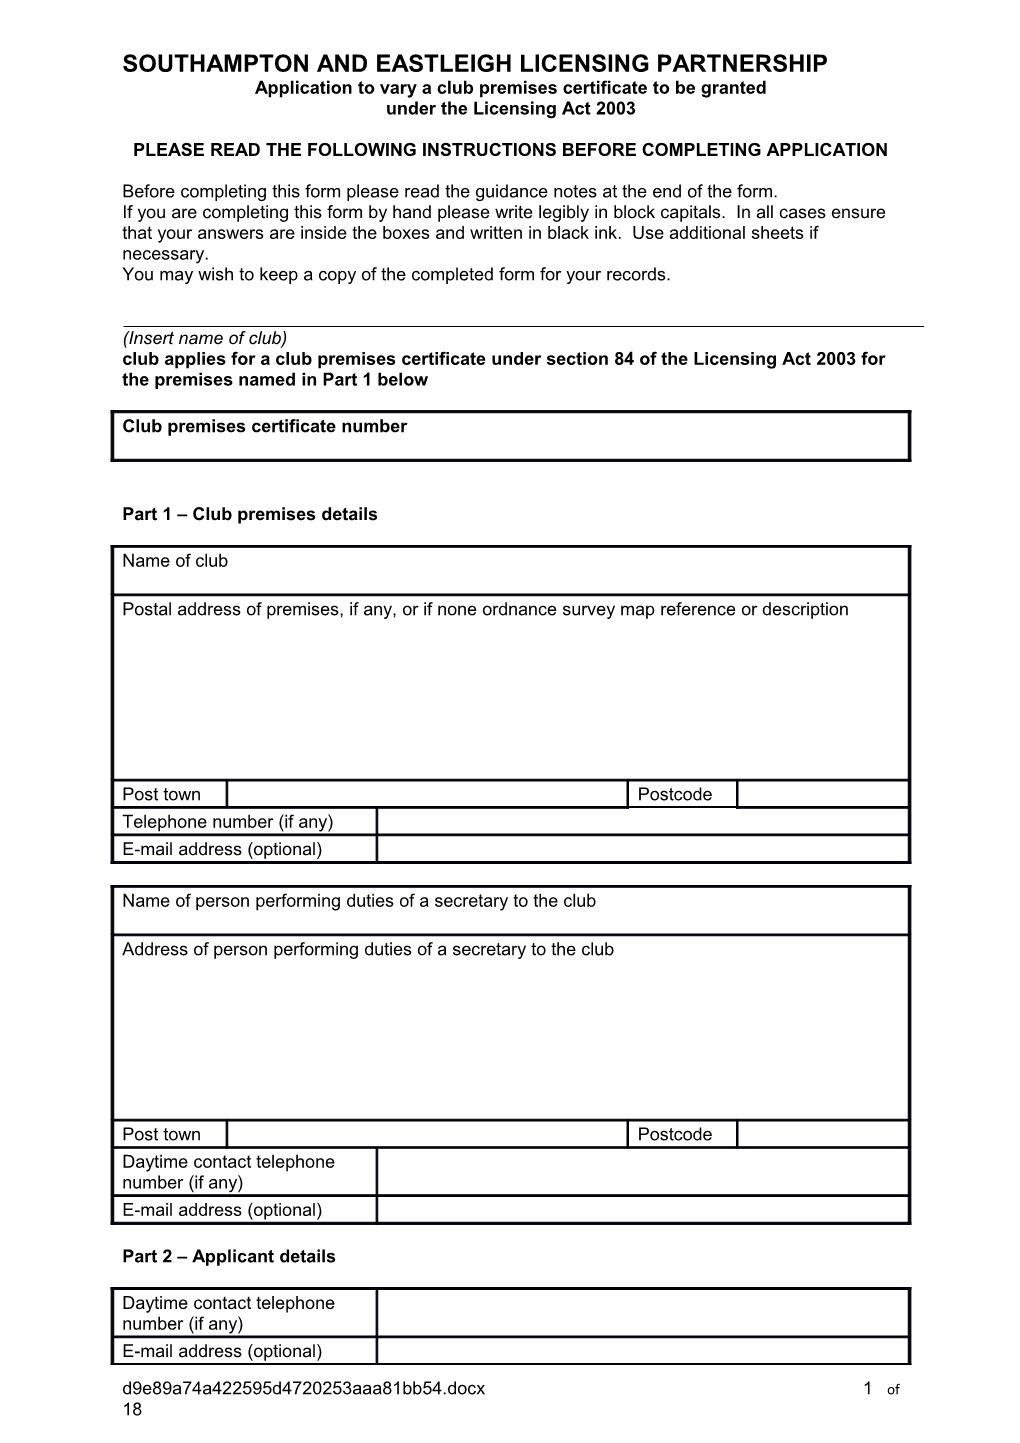 Application to Vary a Club Premises Certificate to Be Granted